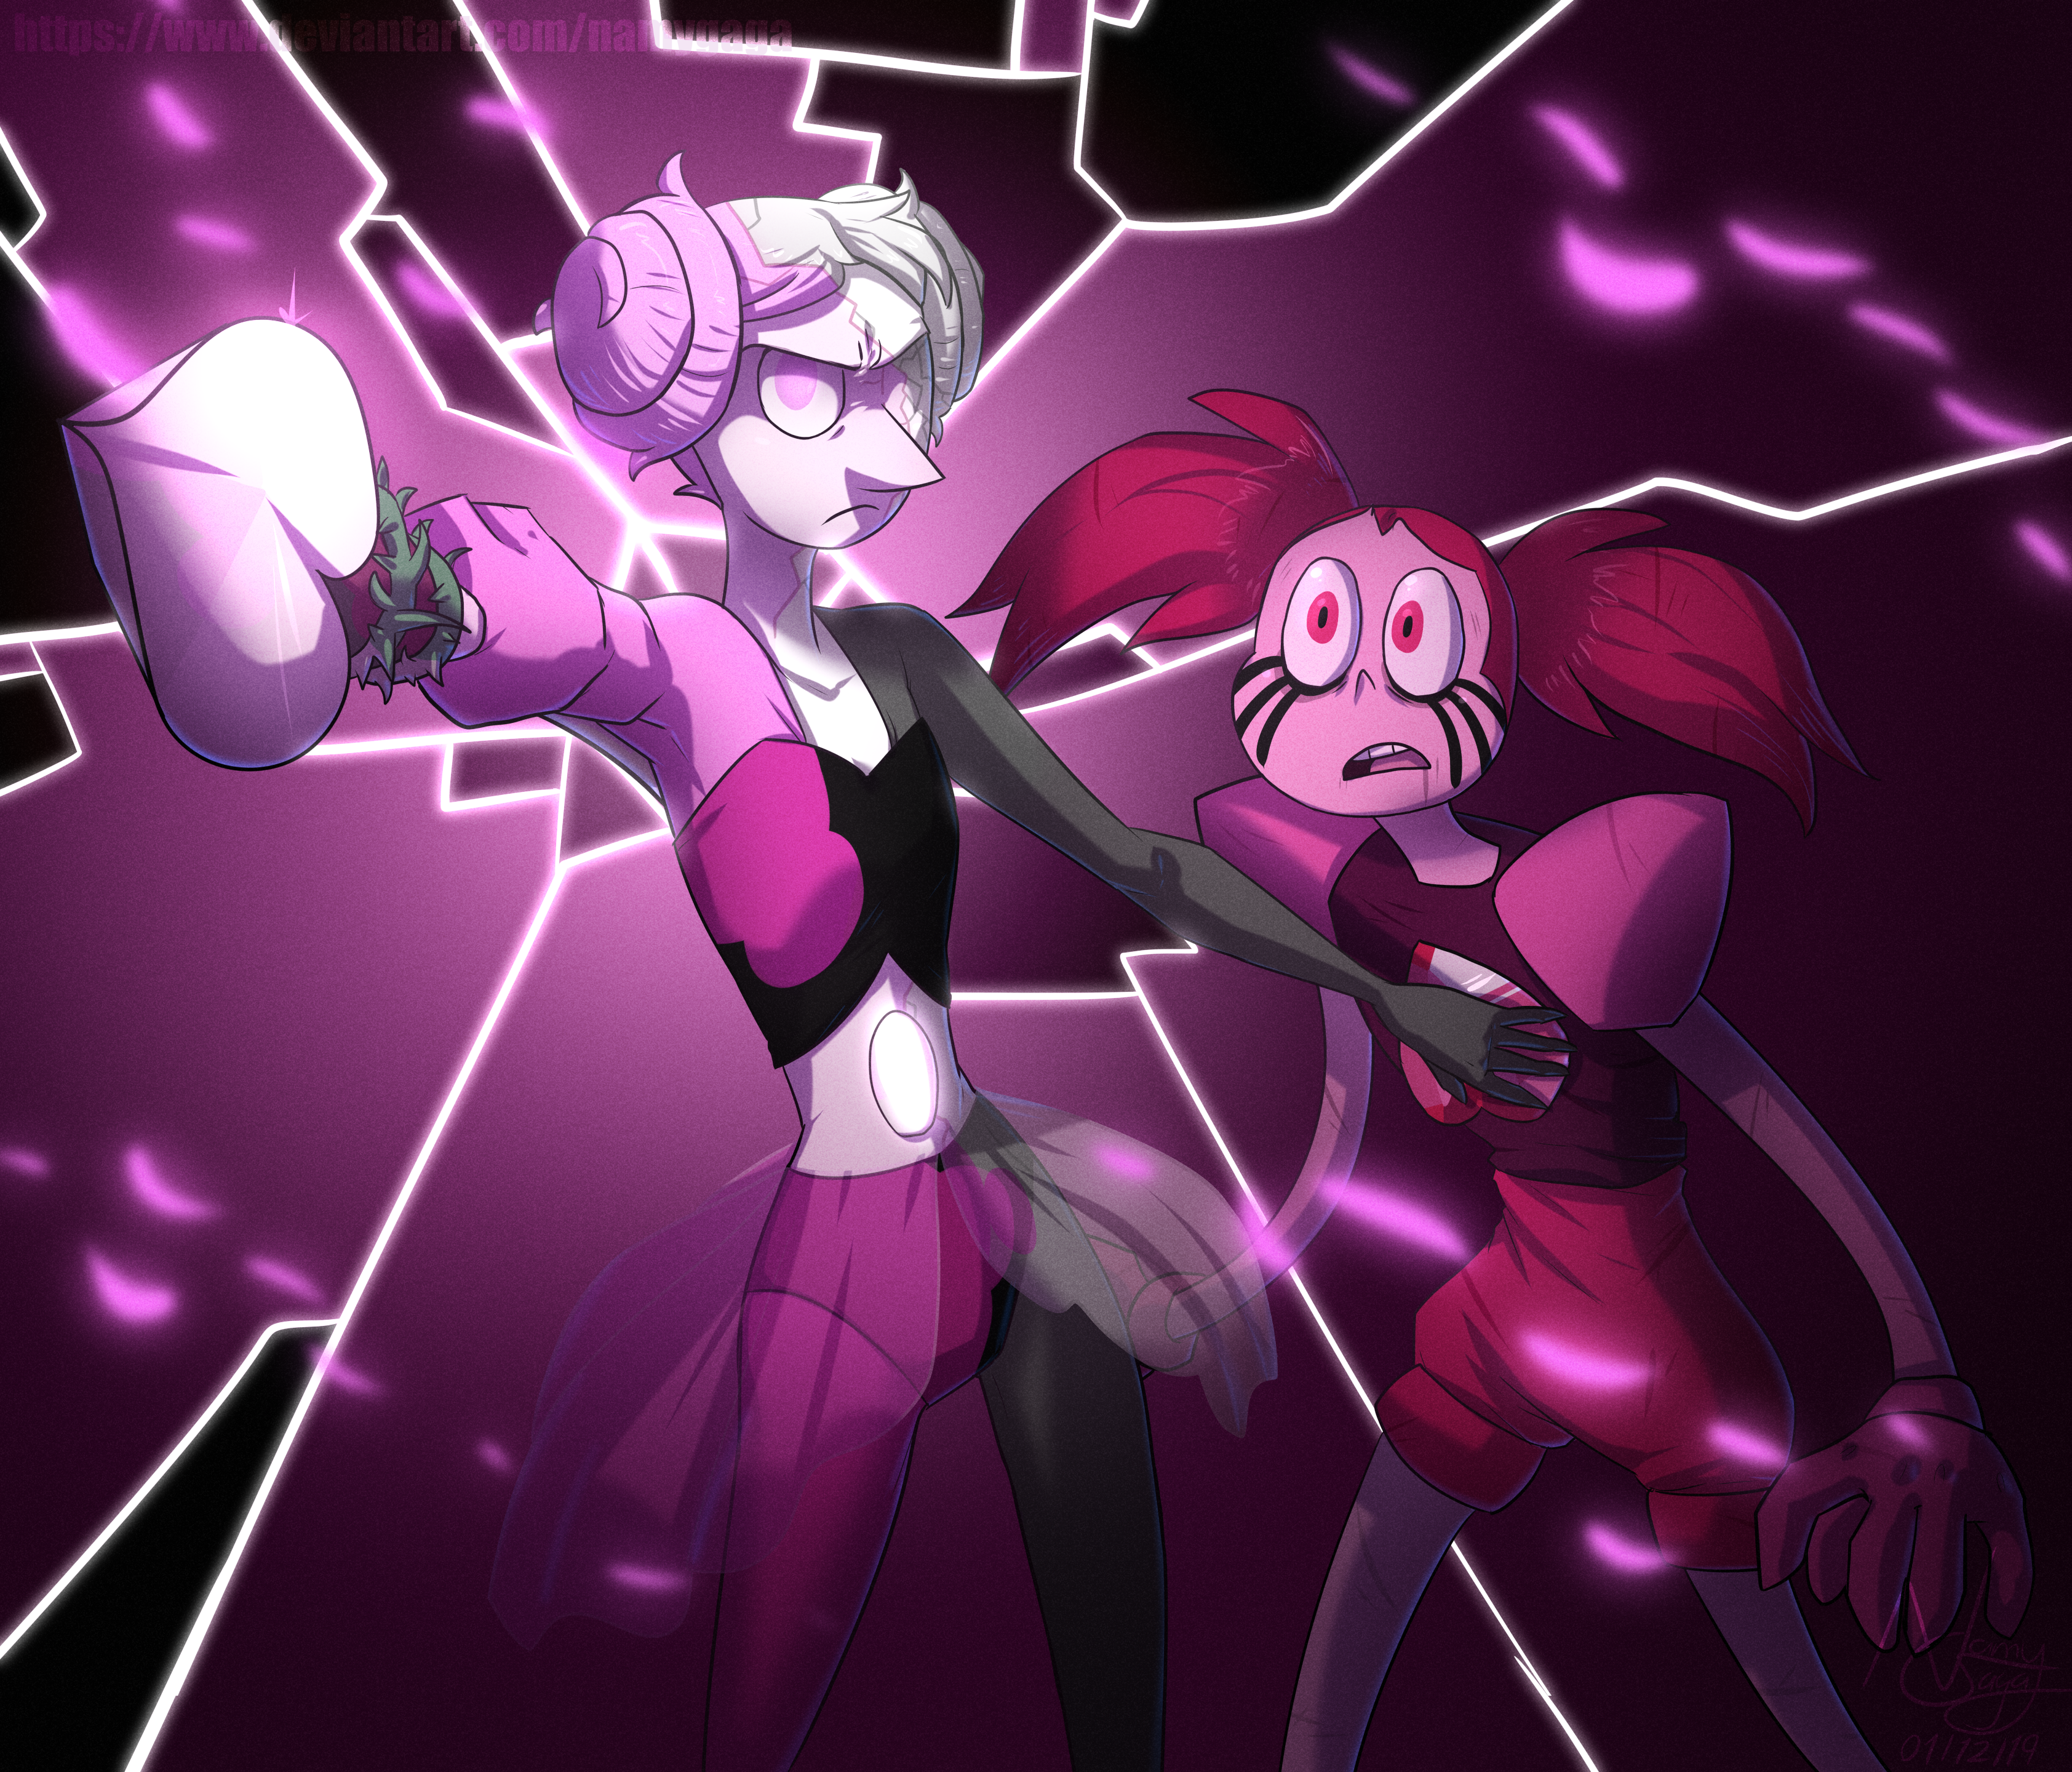 Half Pink Pearl Protects You.